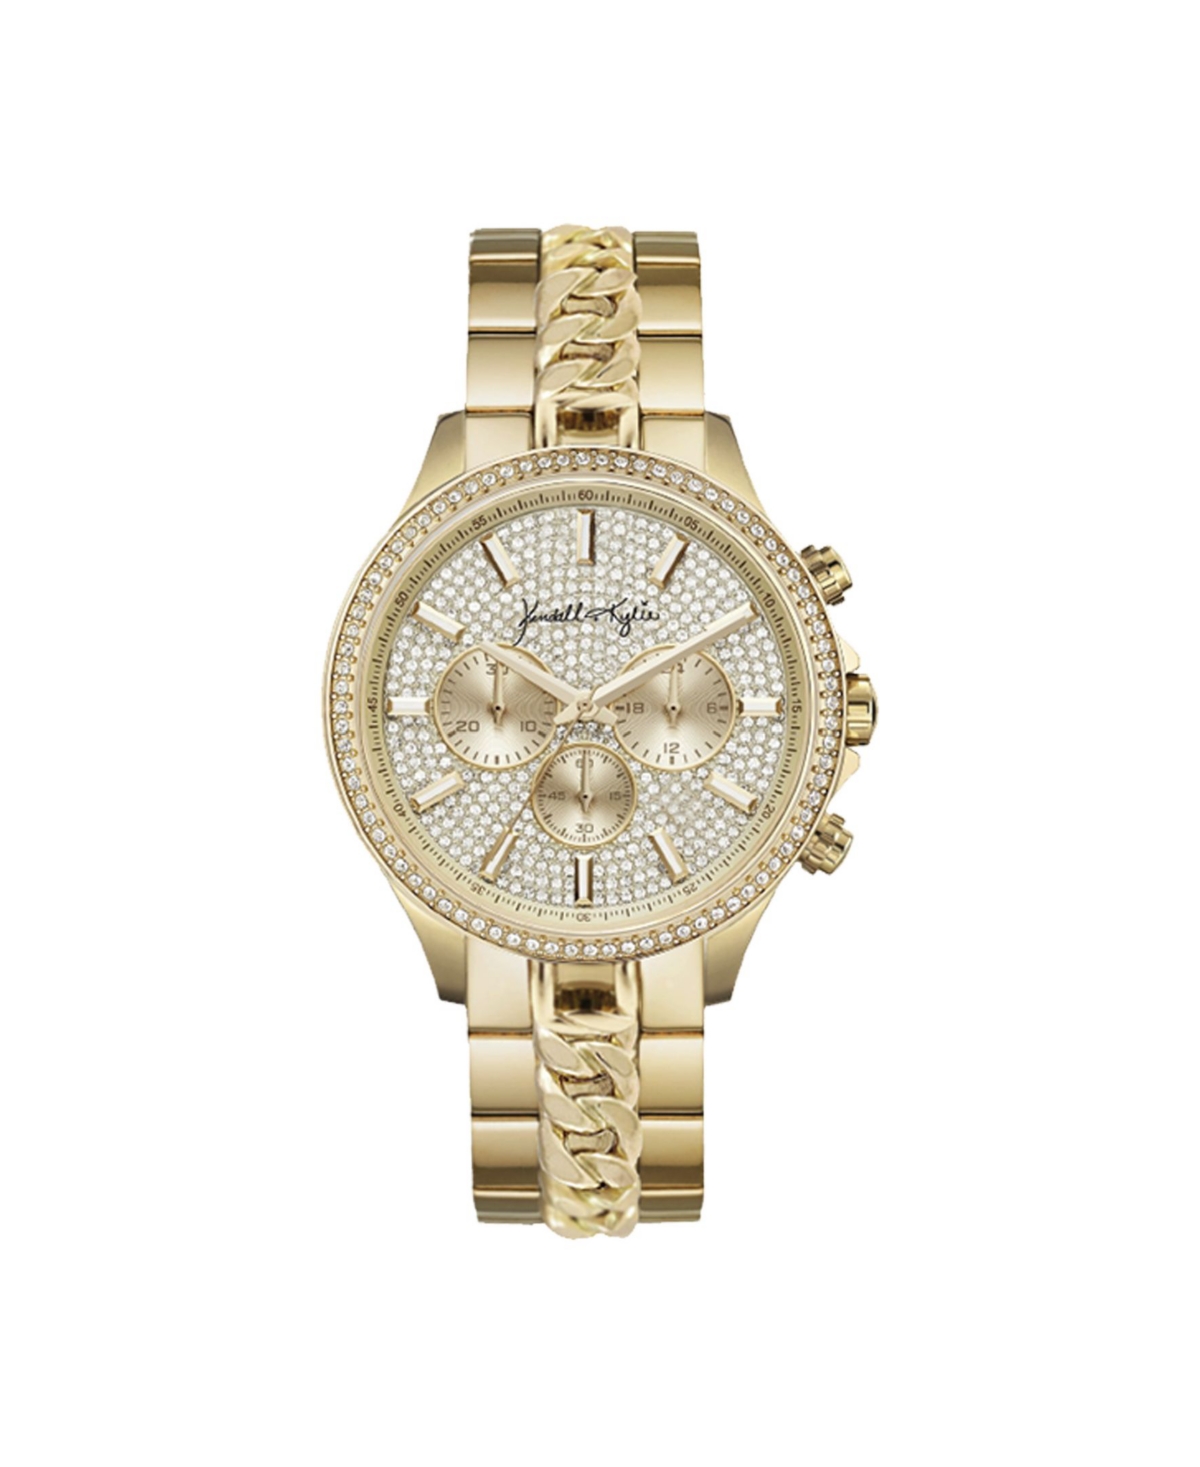 iTouch Women's Kendall + Kylie Holiday Singles Gold-Tone Metal Bracelet Watch - Gold-Tone